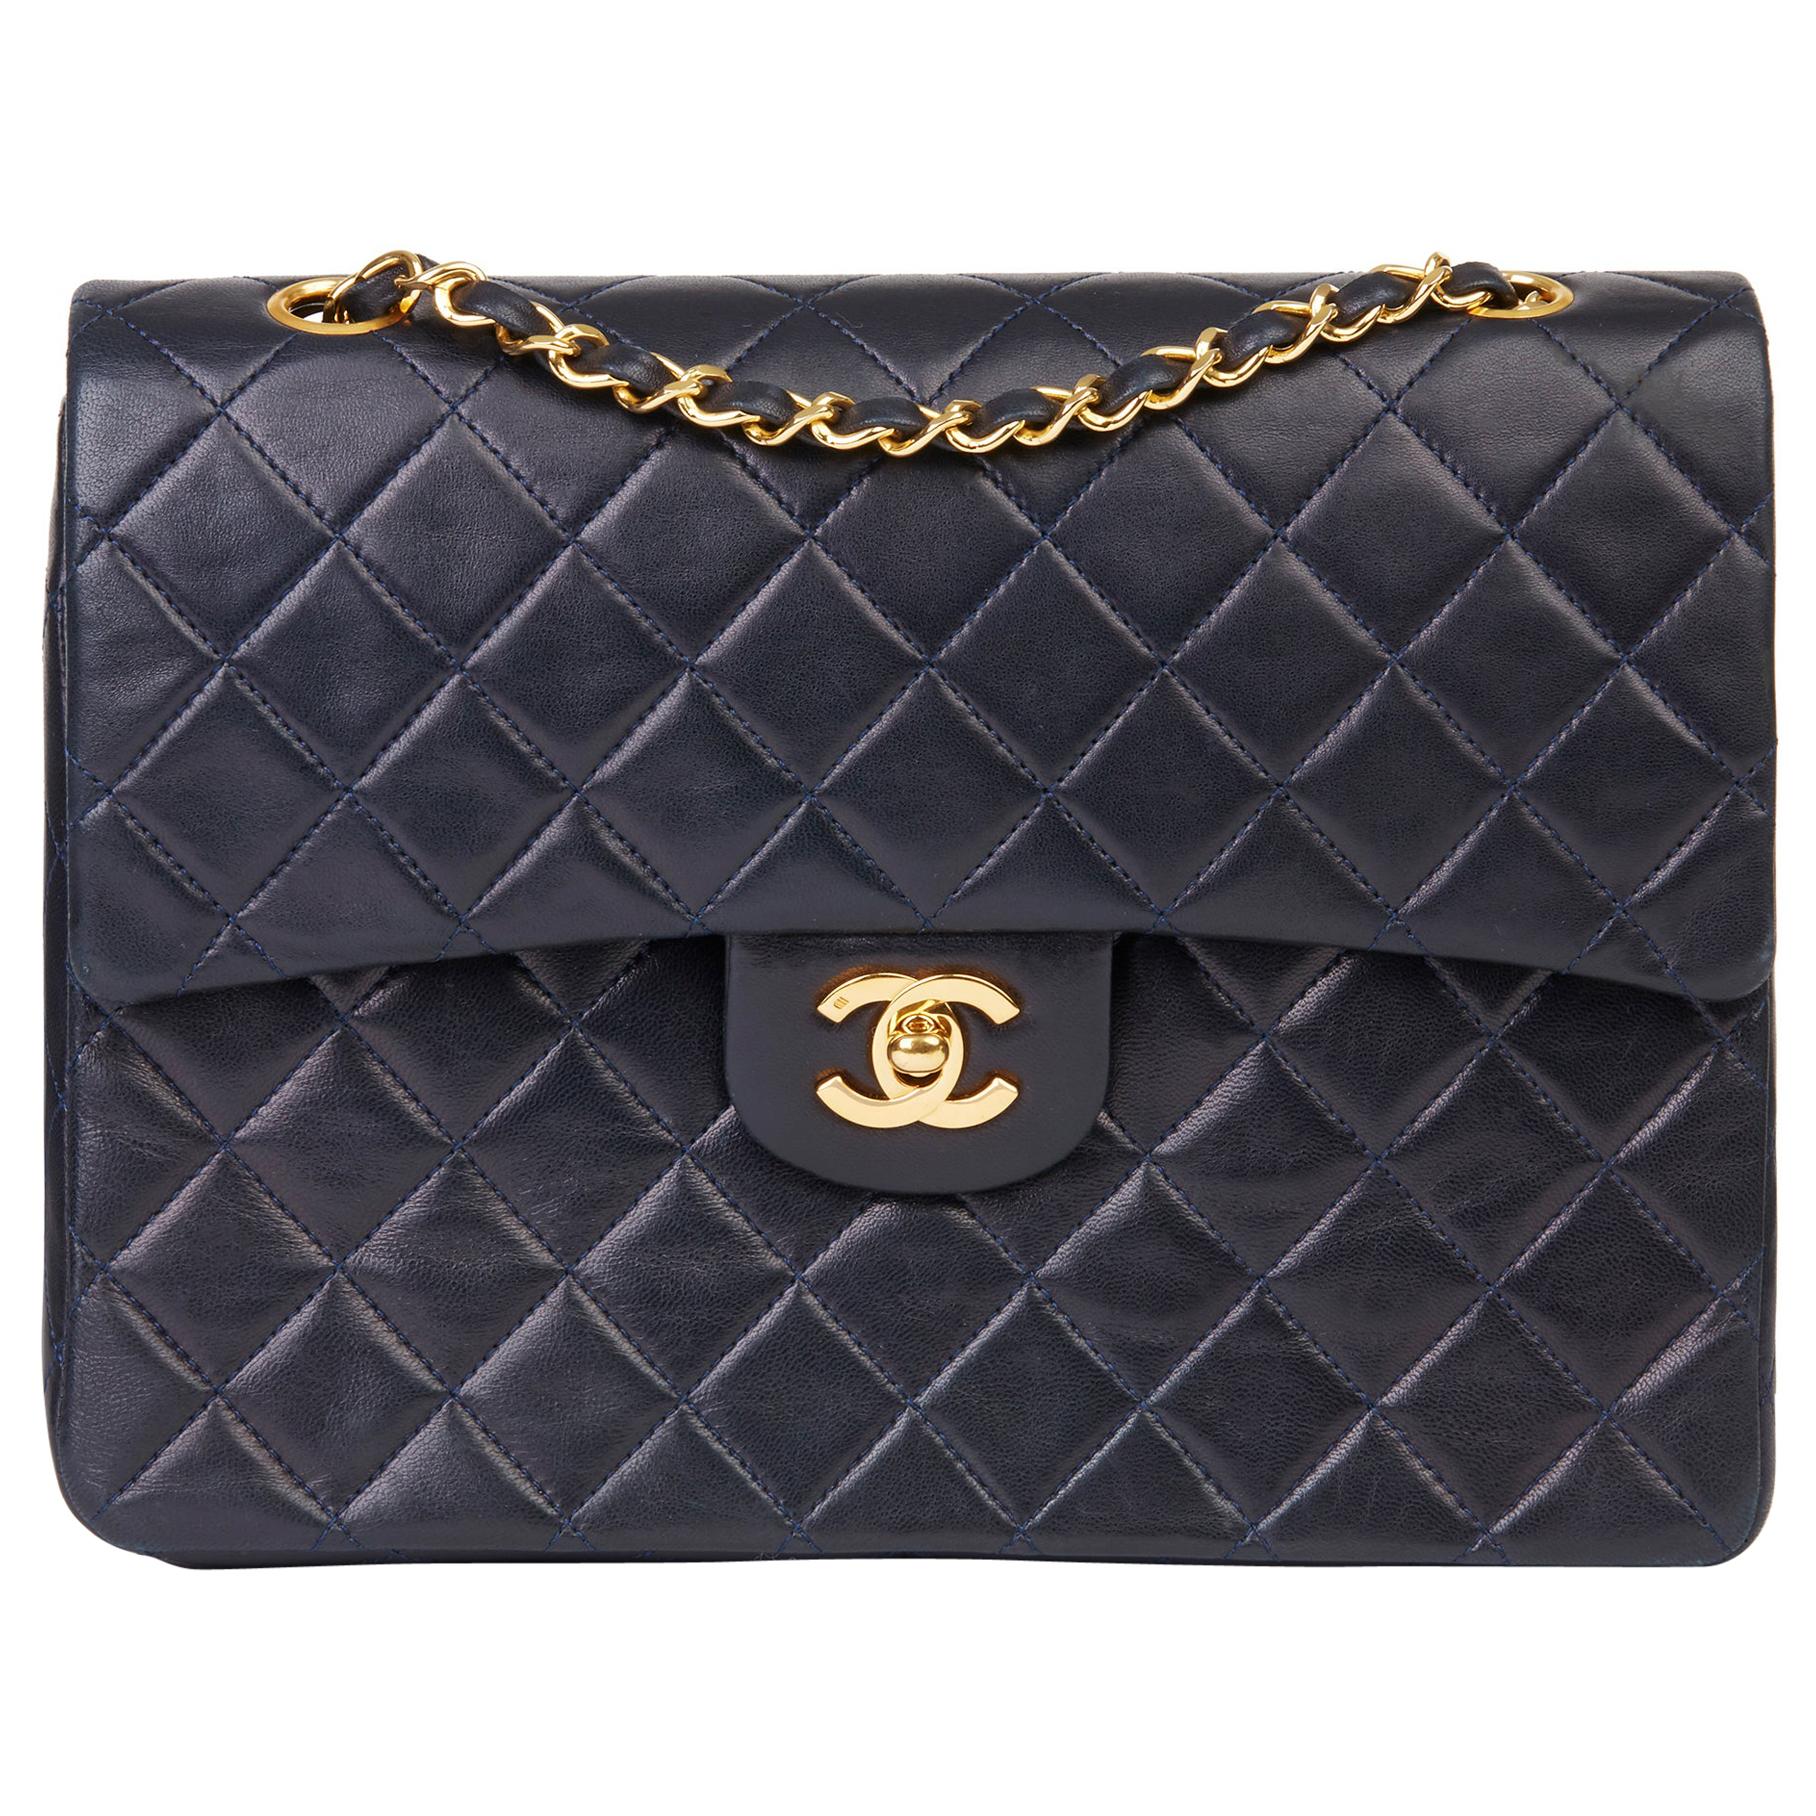 1989 Chanel Navy Quilted Lambskin Vintage Medium Tall Classic Double Flap Bag